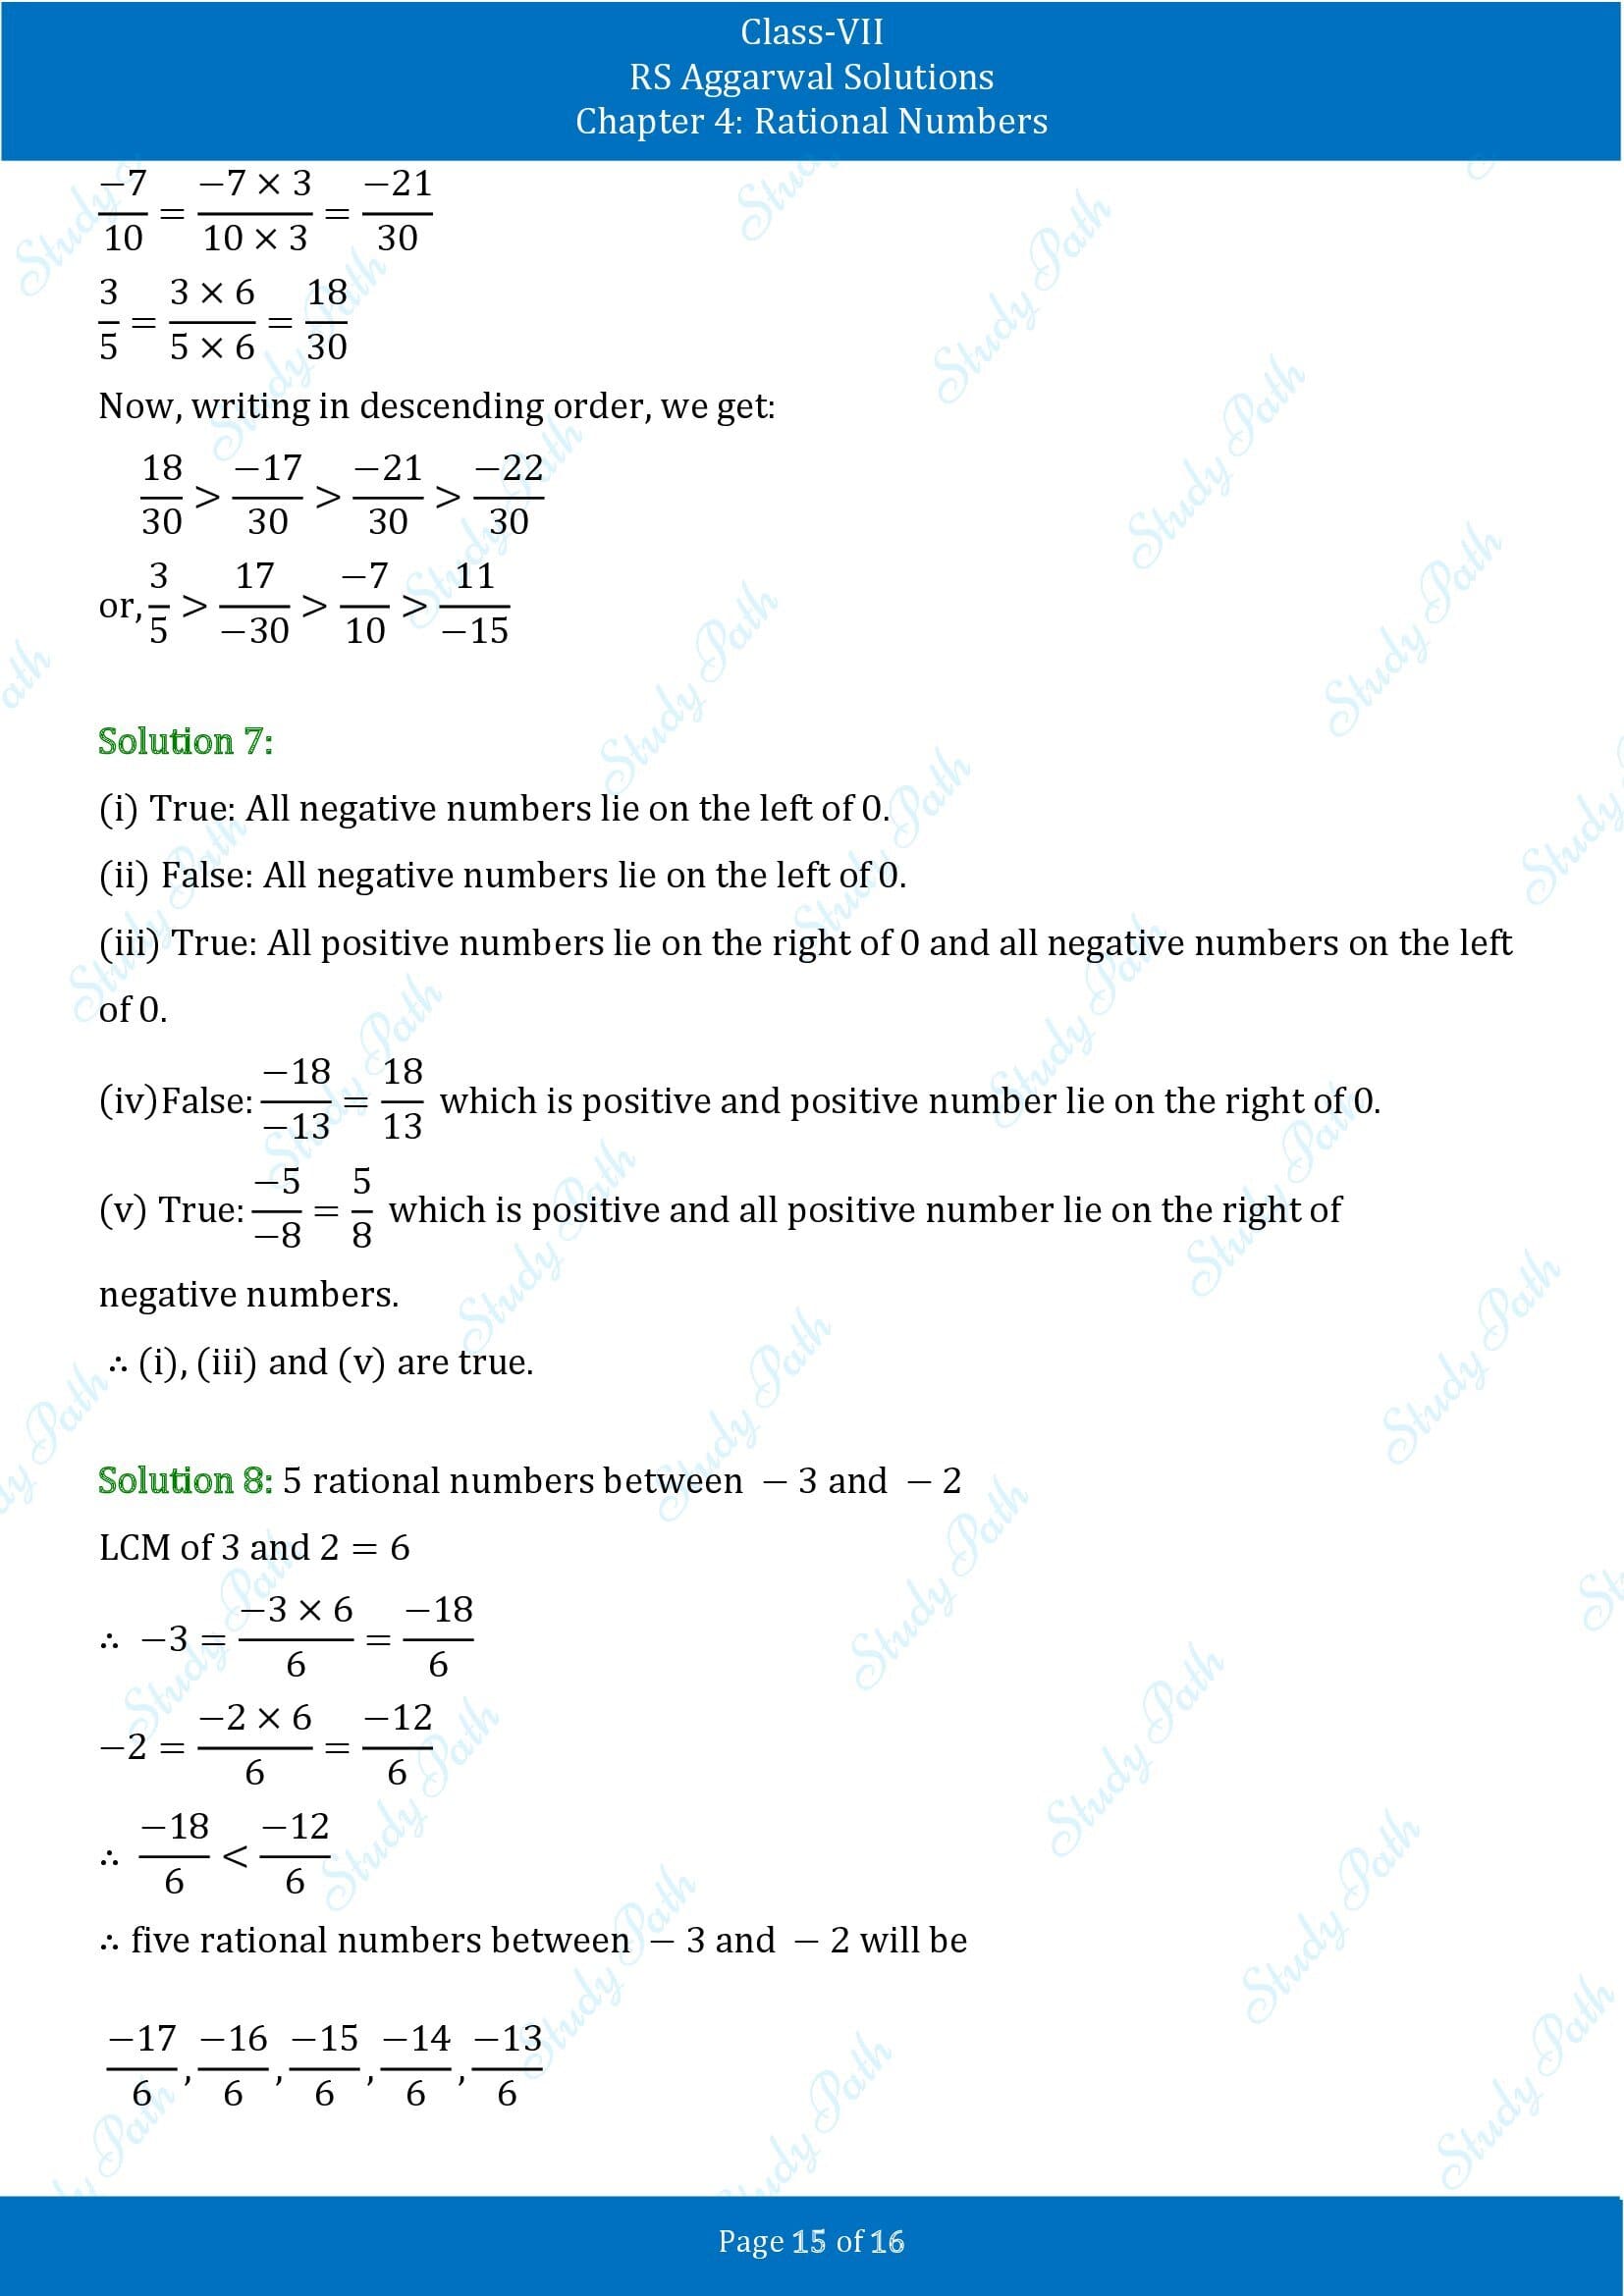 RS Aggarwal Solutions Class 7 Chapter 4 Rational Numbers Exercise 4B 00015